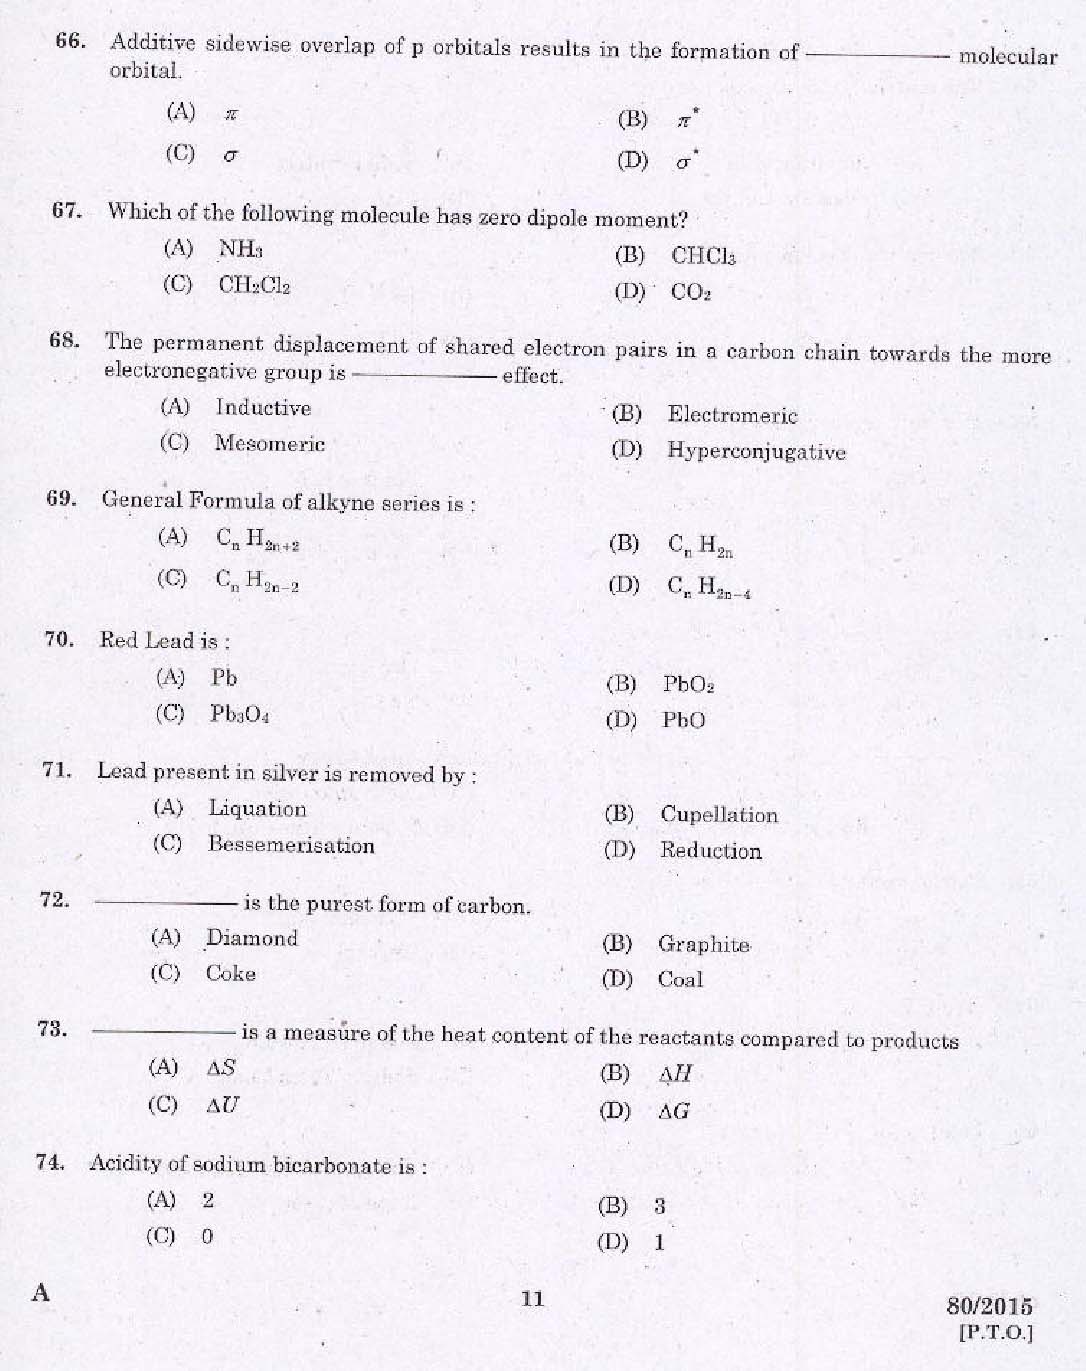 Kerala PSC Station Officer Exam Question Code 802015 9